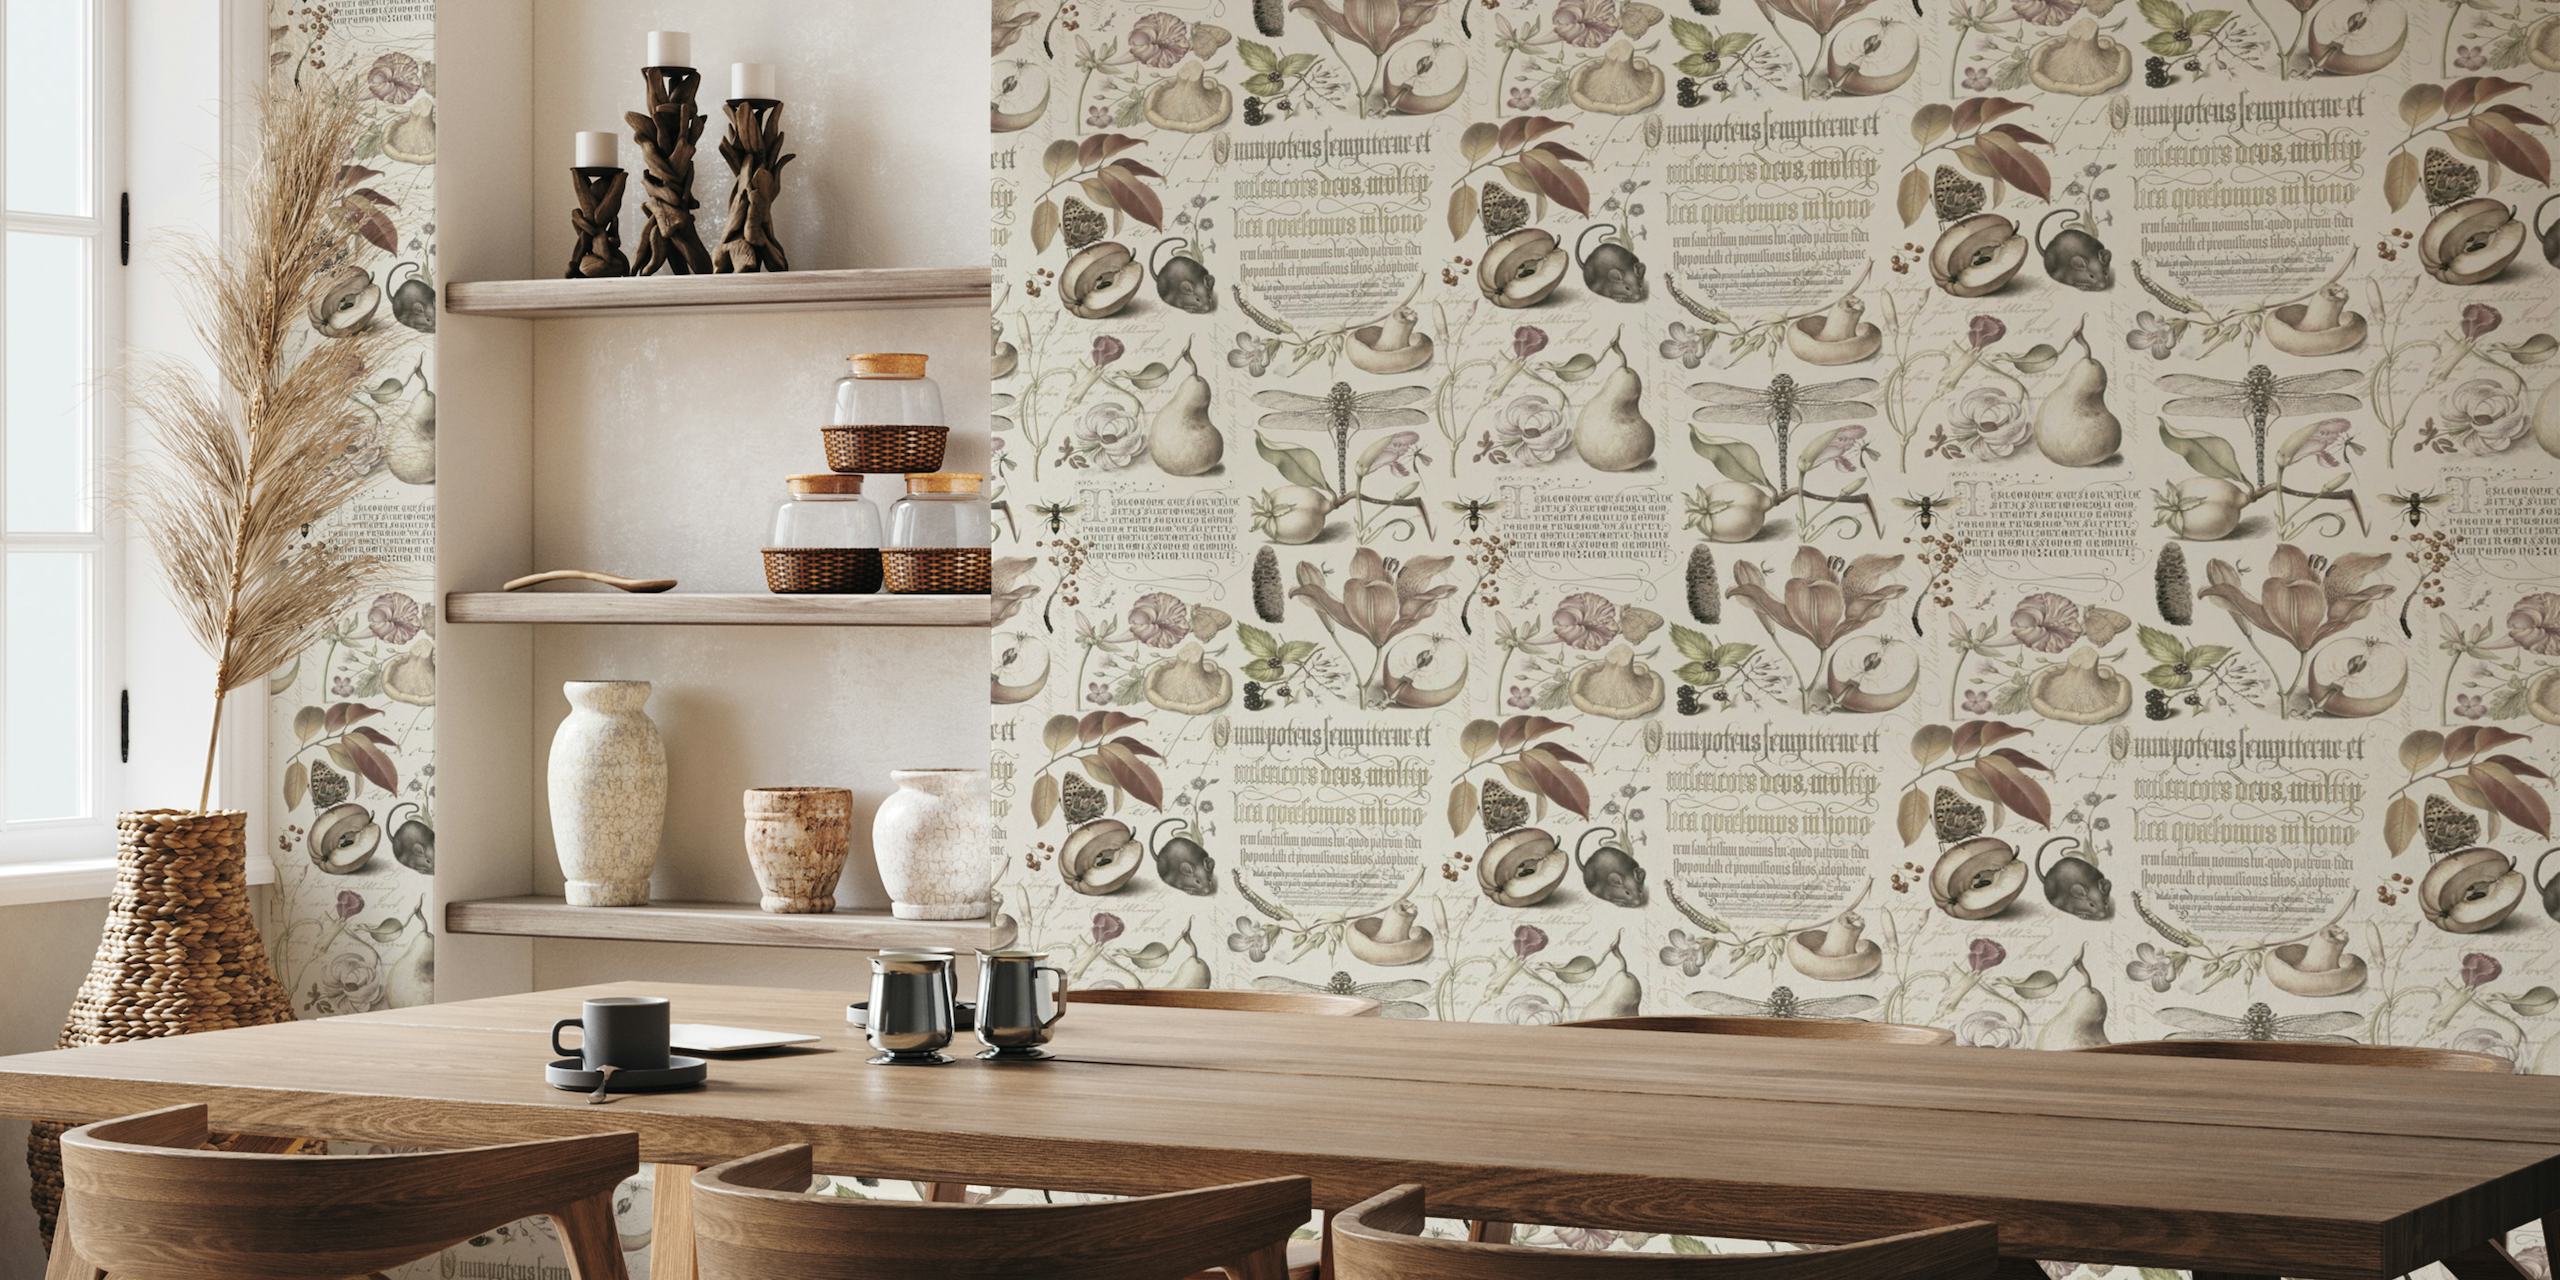 Botanical Treasures By Joris Hoefnagel With Plants, Fruits And Calligraphy Neutral Beige wallpaper